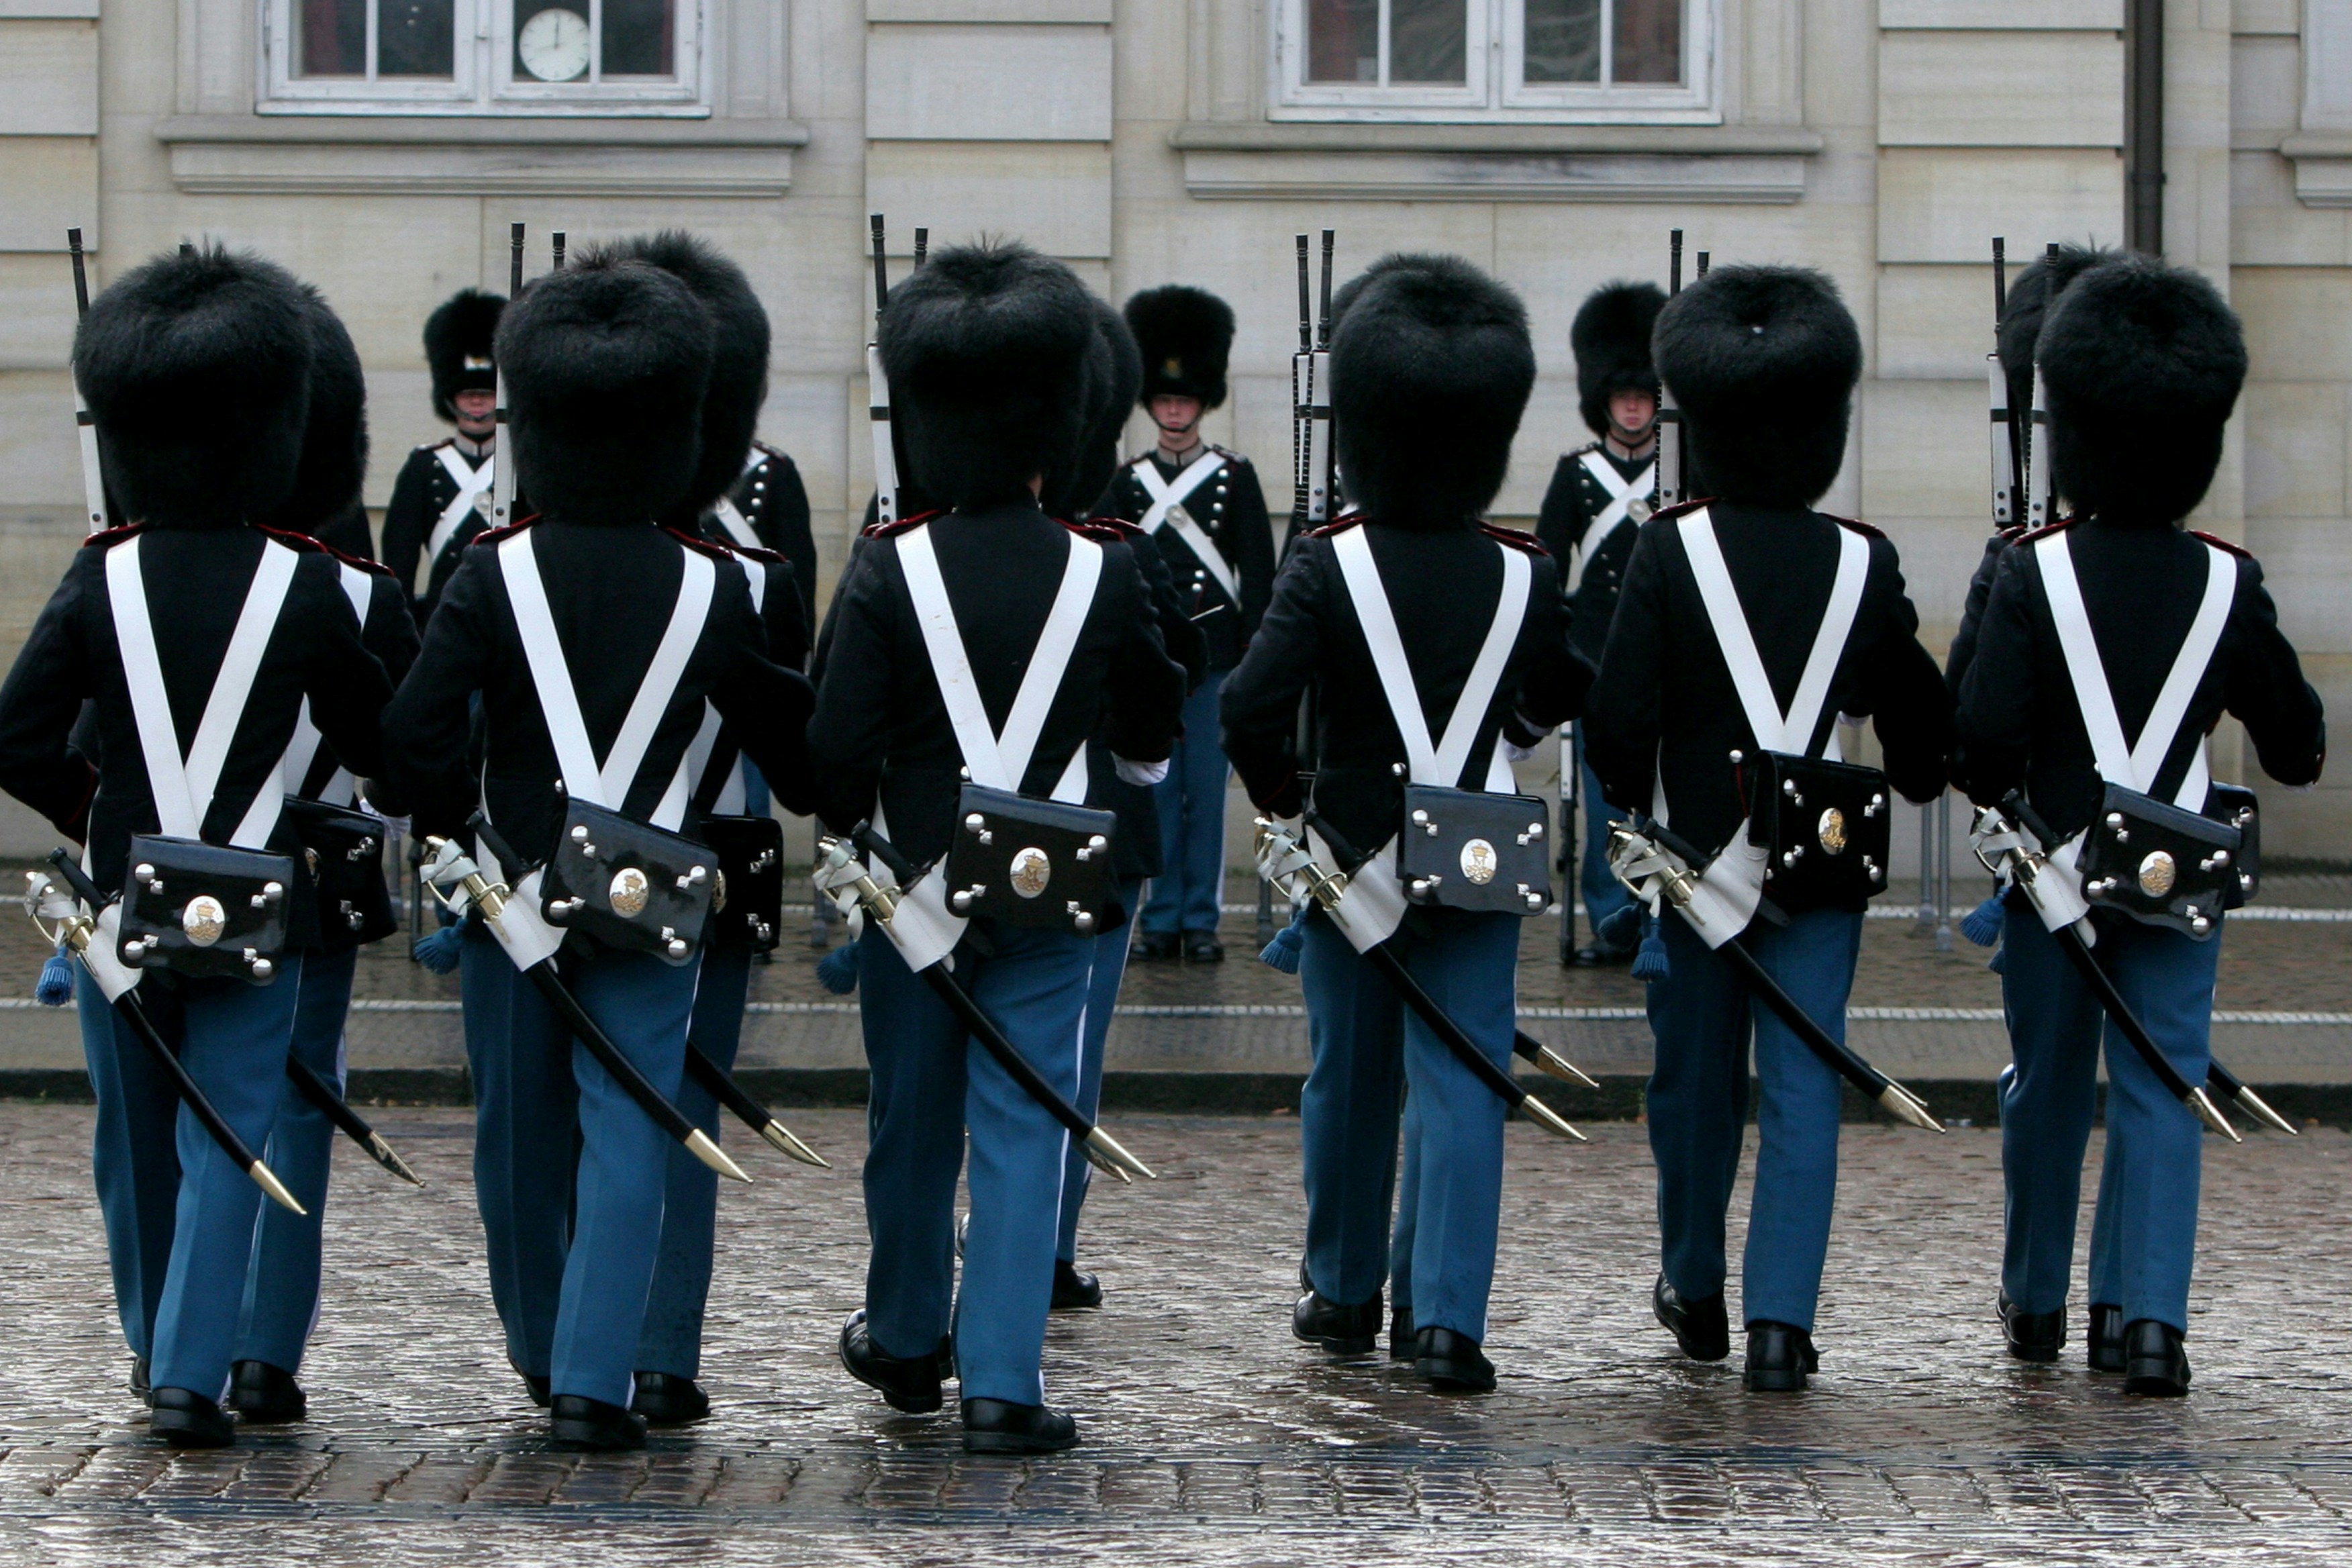 The Royal Life Guards (Danish: Den Kongelige Livgarde) is an infantry regiment of the Danish Army, founded in 1658 by King Frederik III. It serves in two roles: as a front line combat unit, and as a guard/ceremonial unit to the Danish monarchy. Until its disbandment, the Royal Horse Guards (Livgarden til Hest), served the role as the mounted guard/ceremonial unit, afterwards the role was taken over by Guard Hussar Regiment Mounted Squadron.